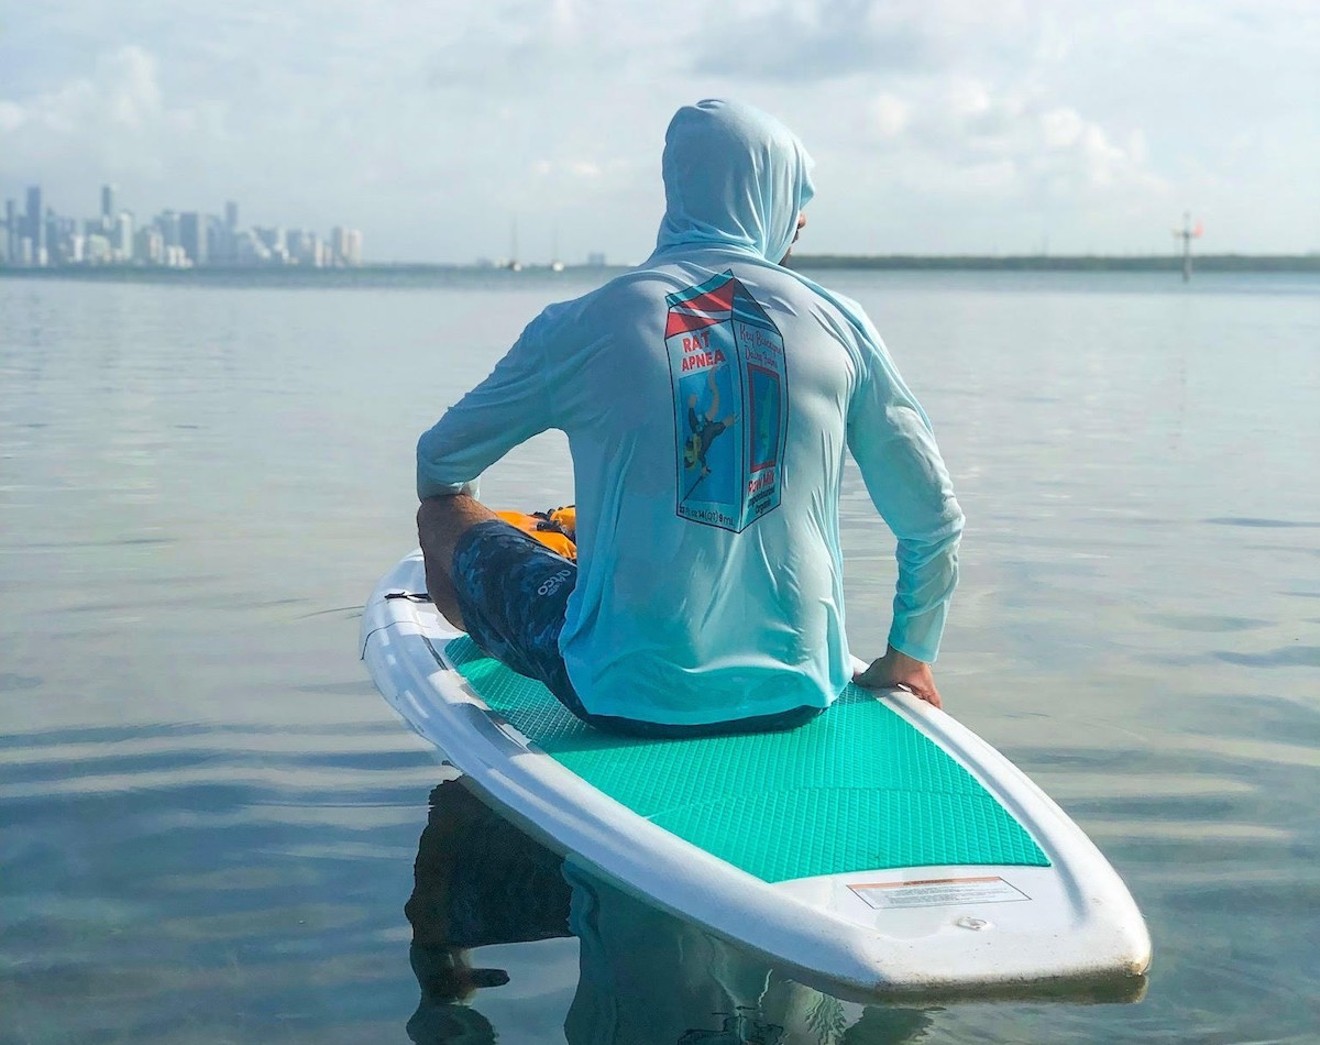 Padl, a paddleboard-sharing app, will launch next week in Key Biscayne.